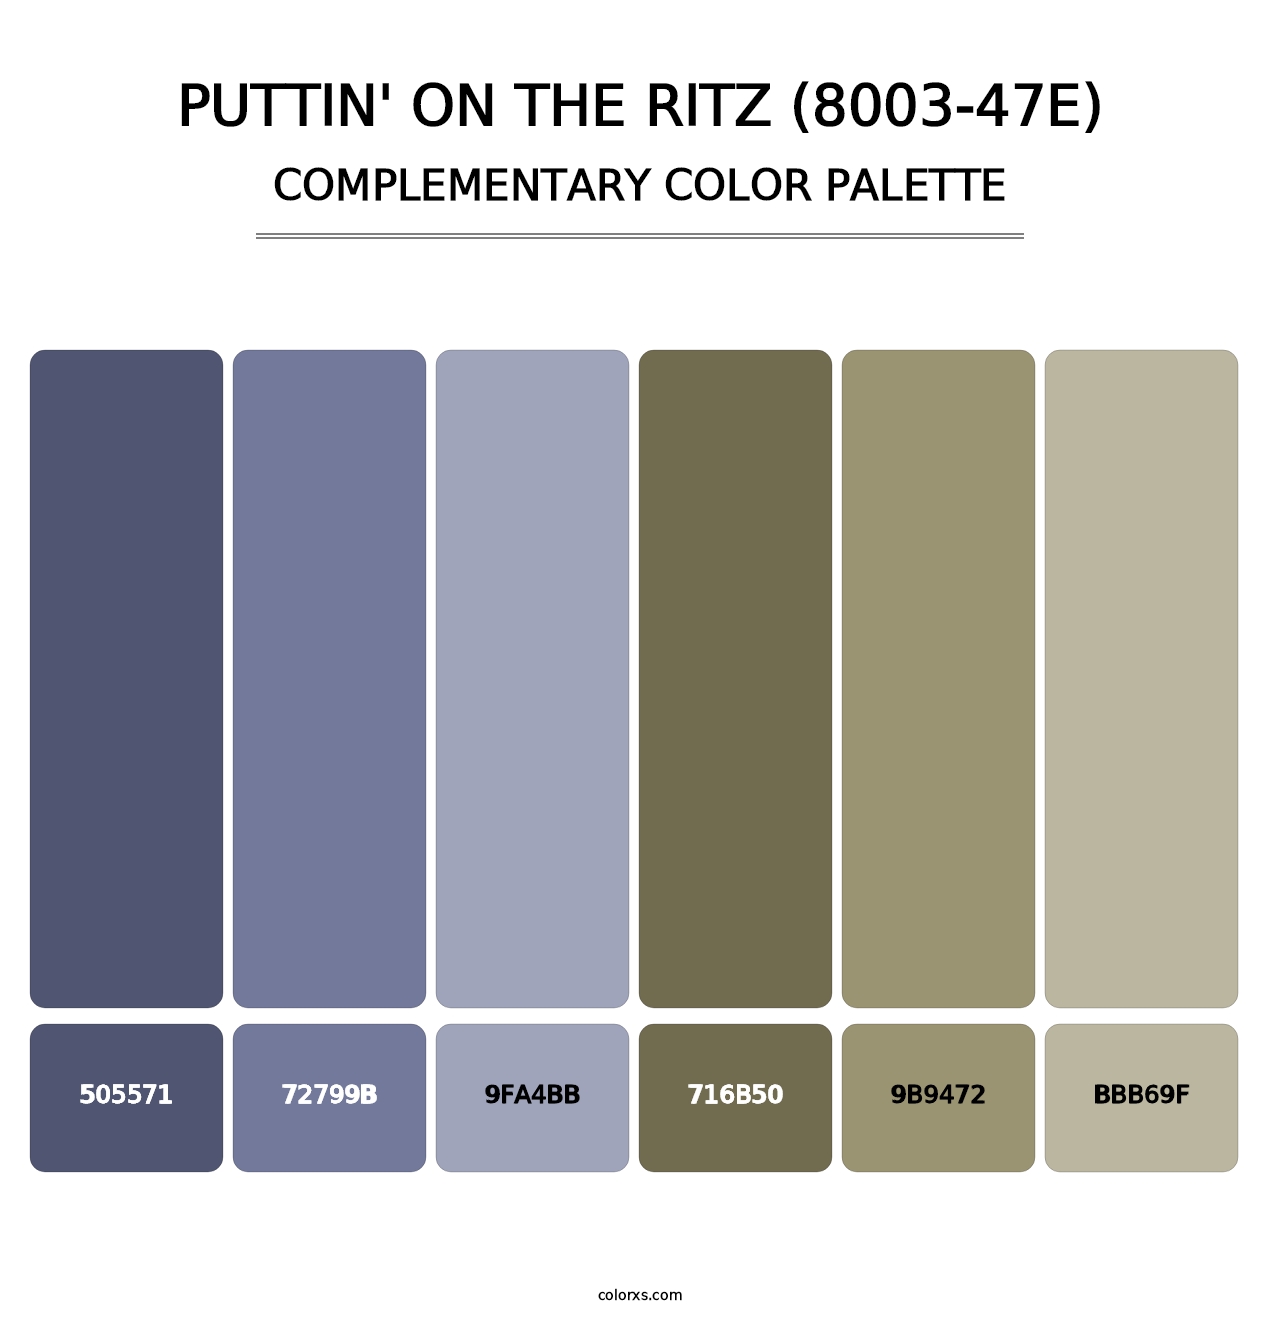 Puttin' on the Ritz (8003-47E) - Complementary Color Palette